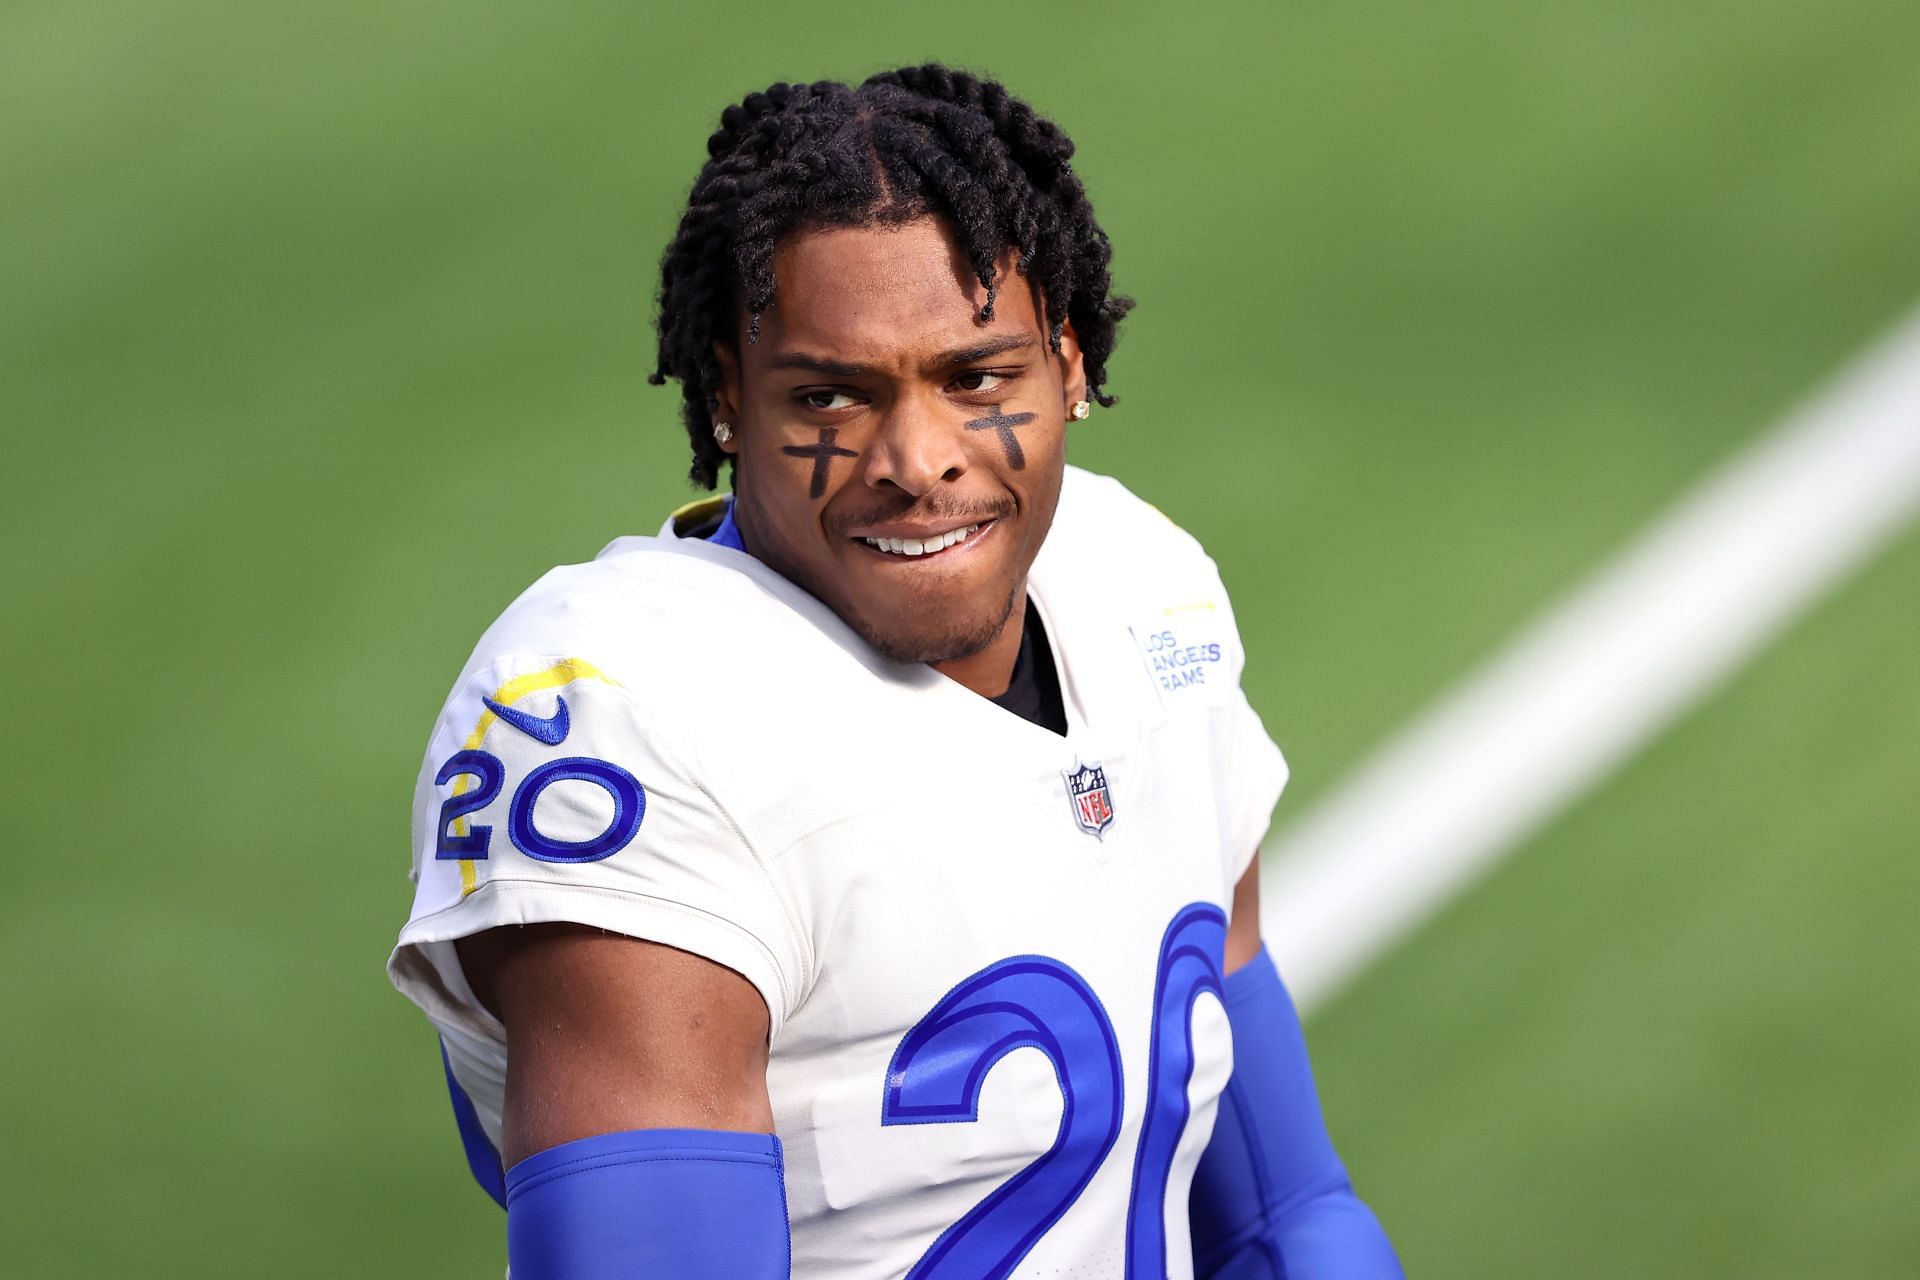 Rams trade Pro Bowl cornerback Jalen Ramsey to the Dolphins